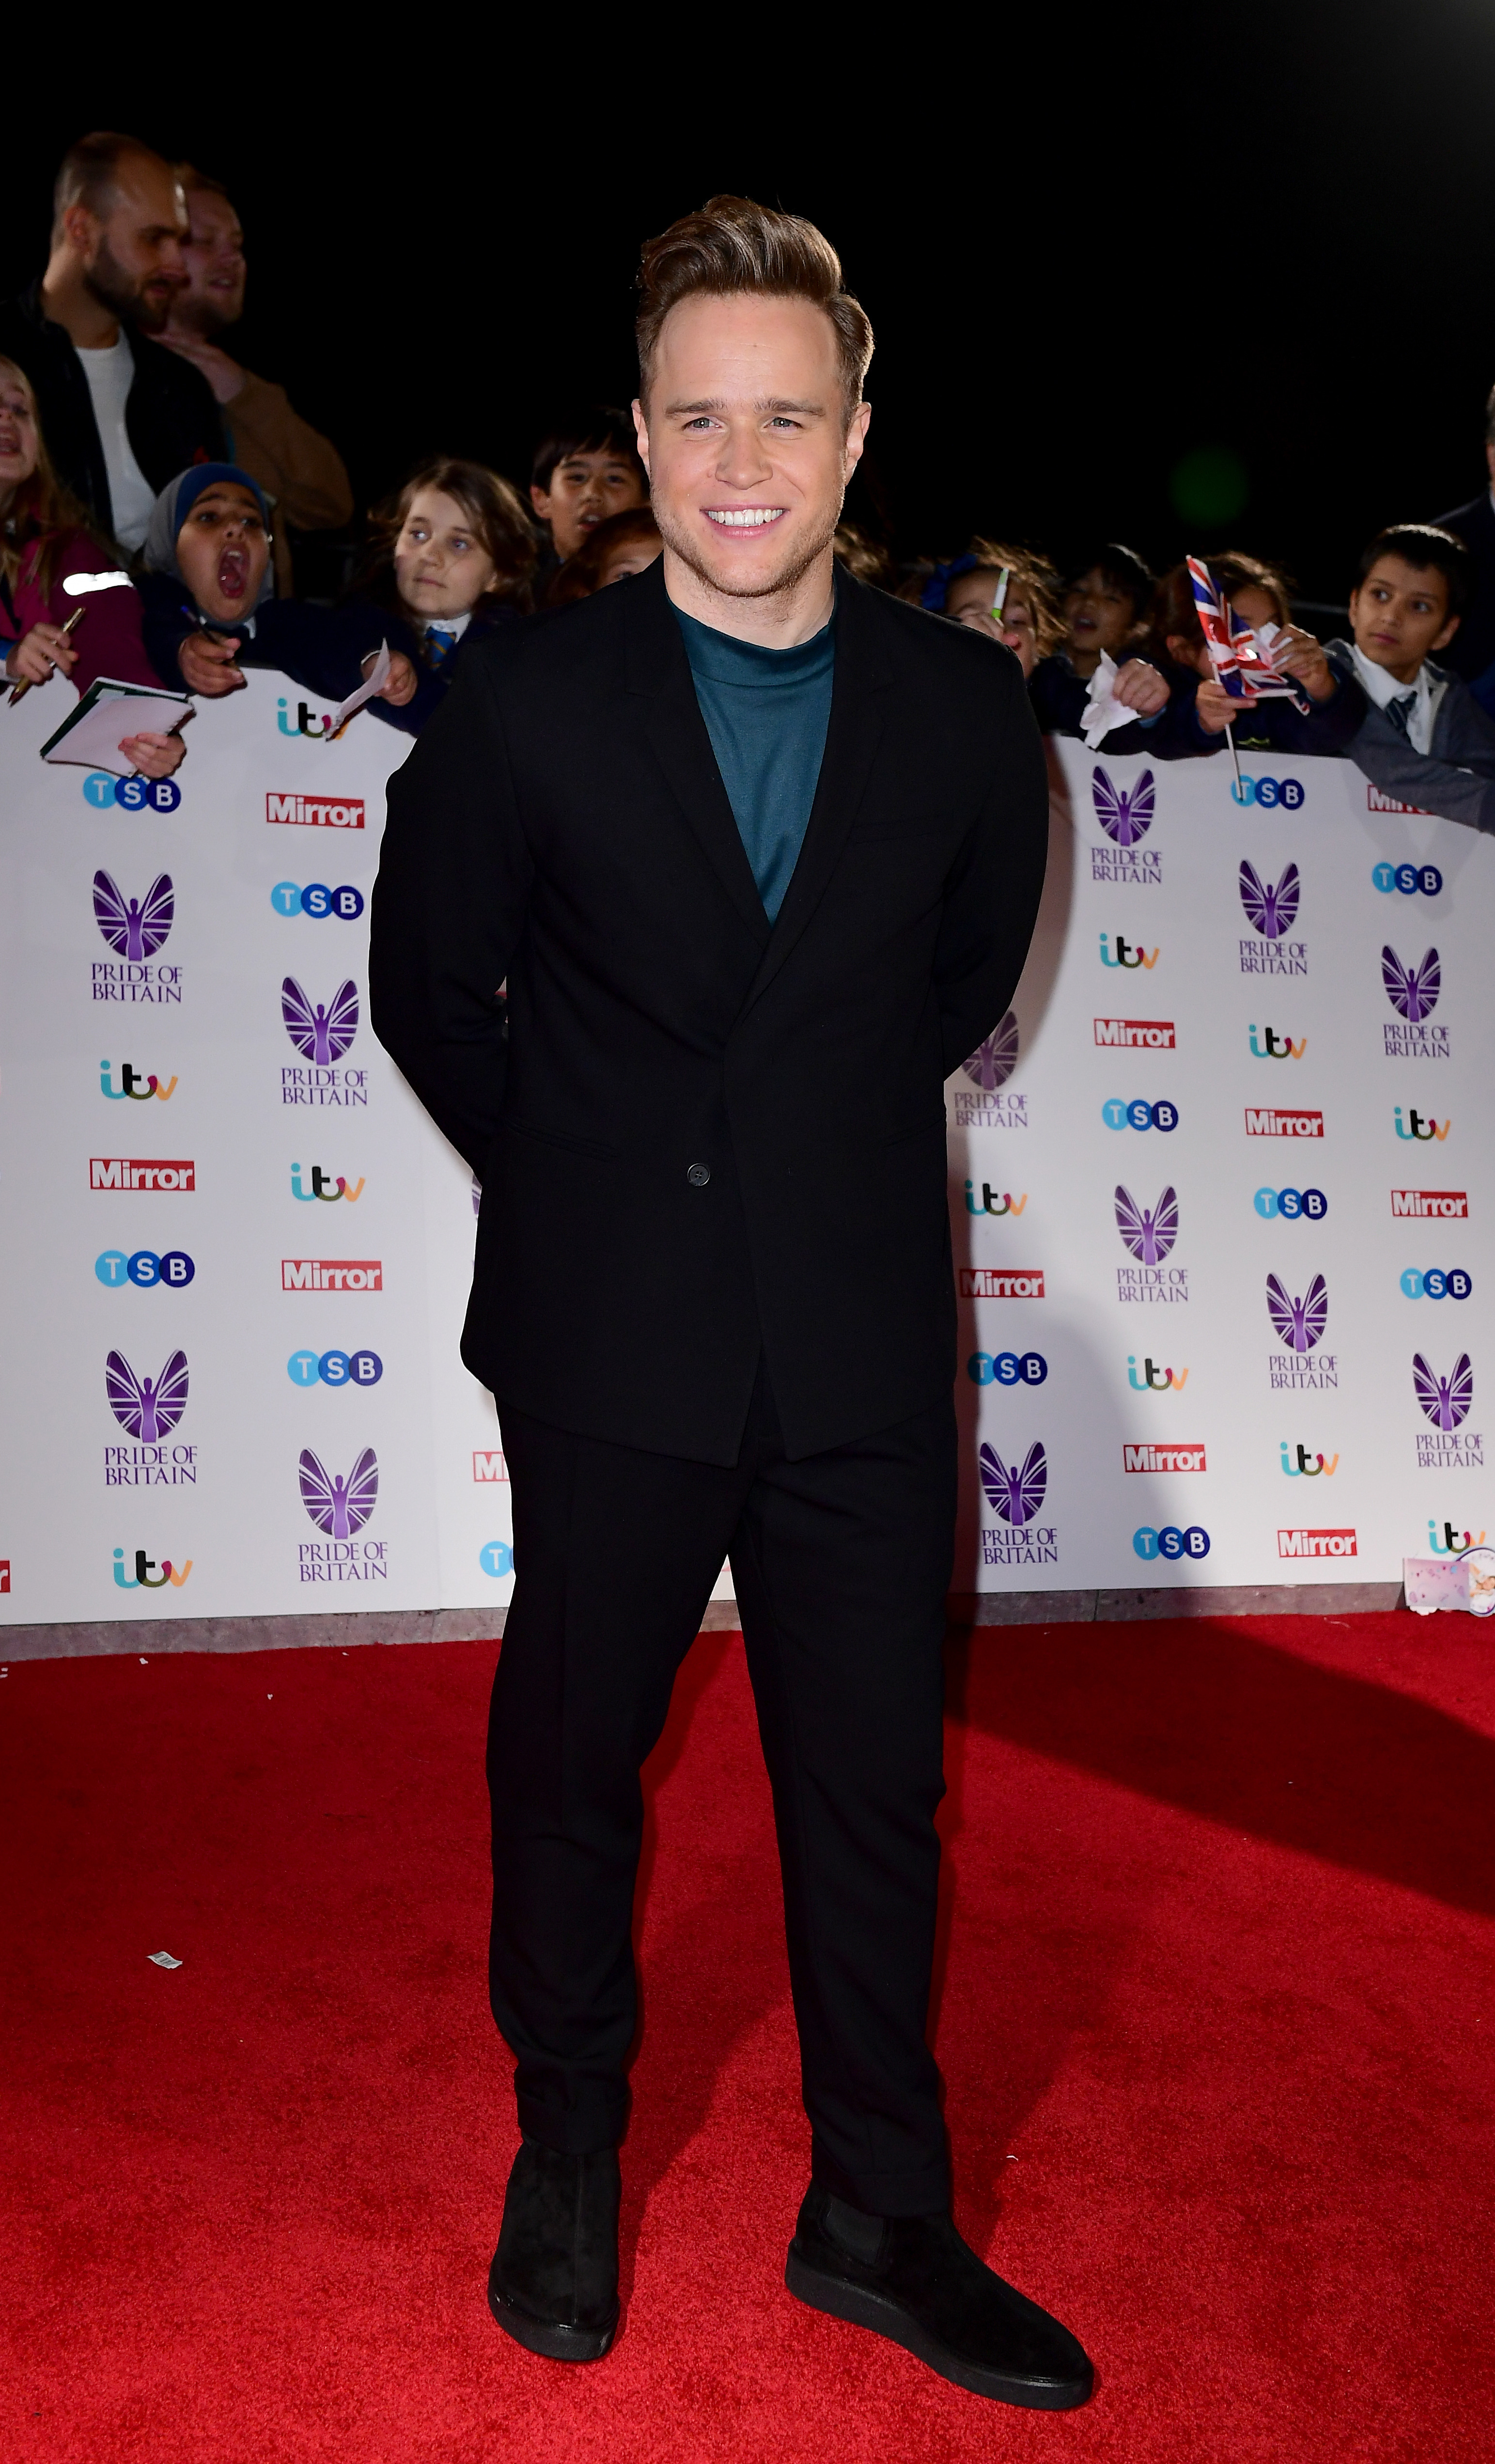 Olly Murs attending The Pride of Britain Awards 20